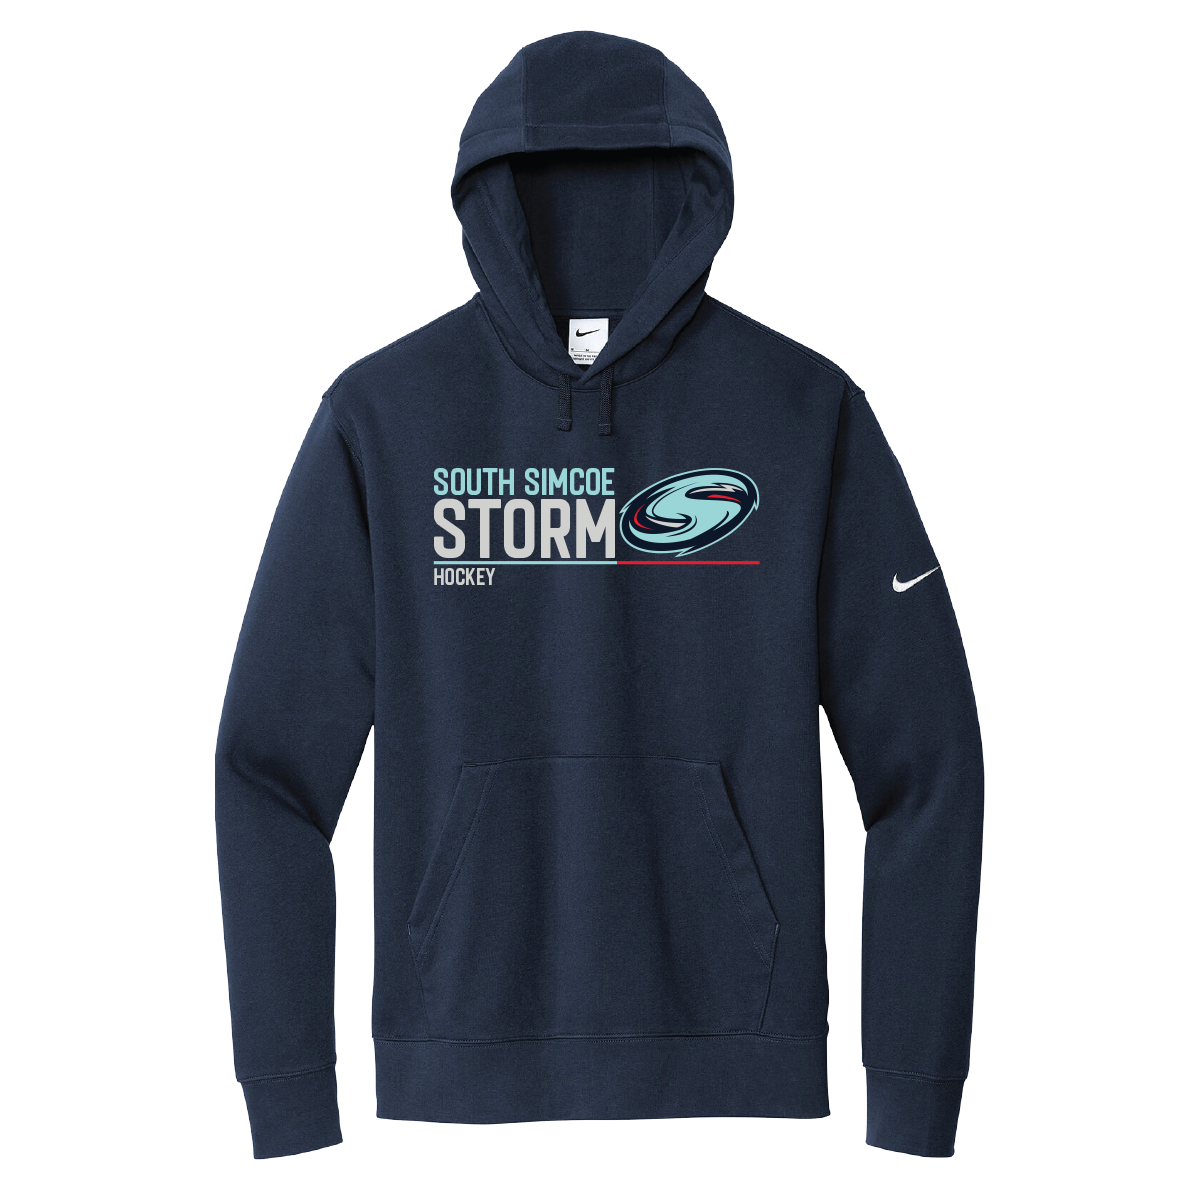 Storm Launch Day Nike Hoodie